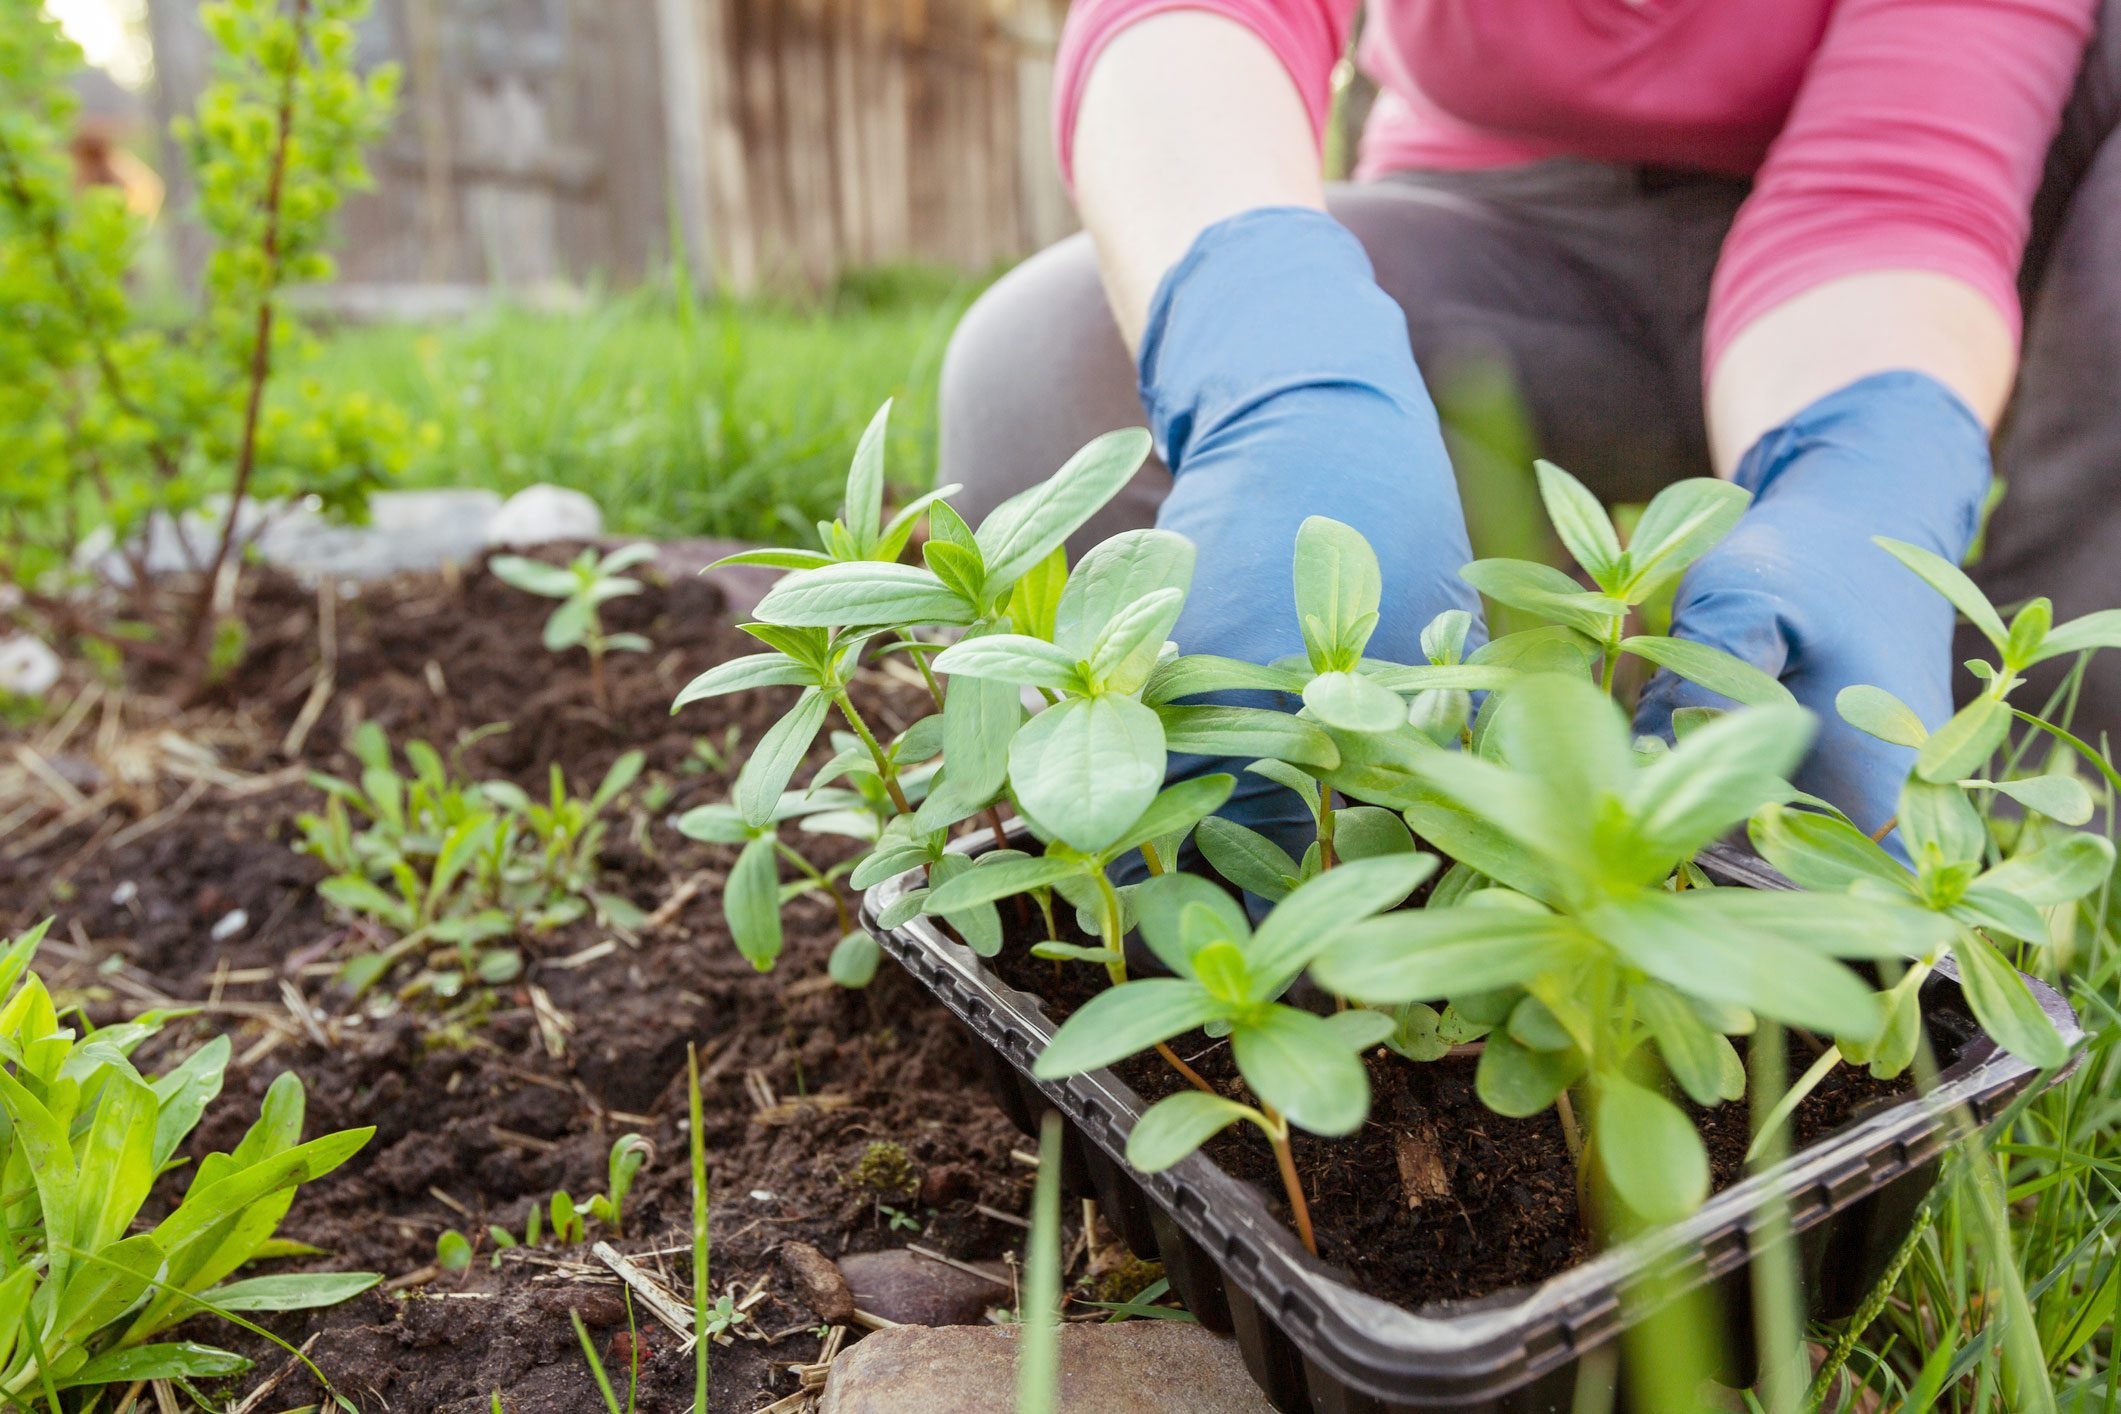 Gardening 101: How To Plant Flowers